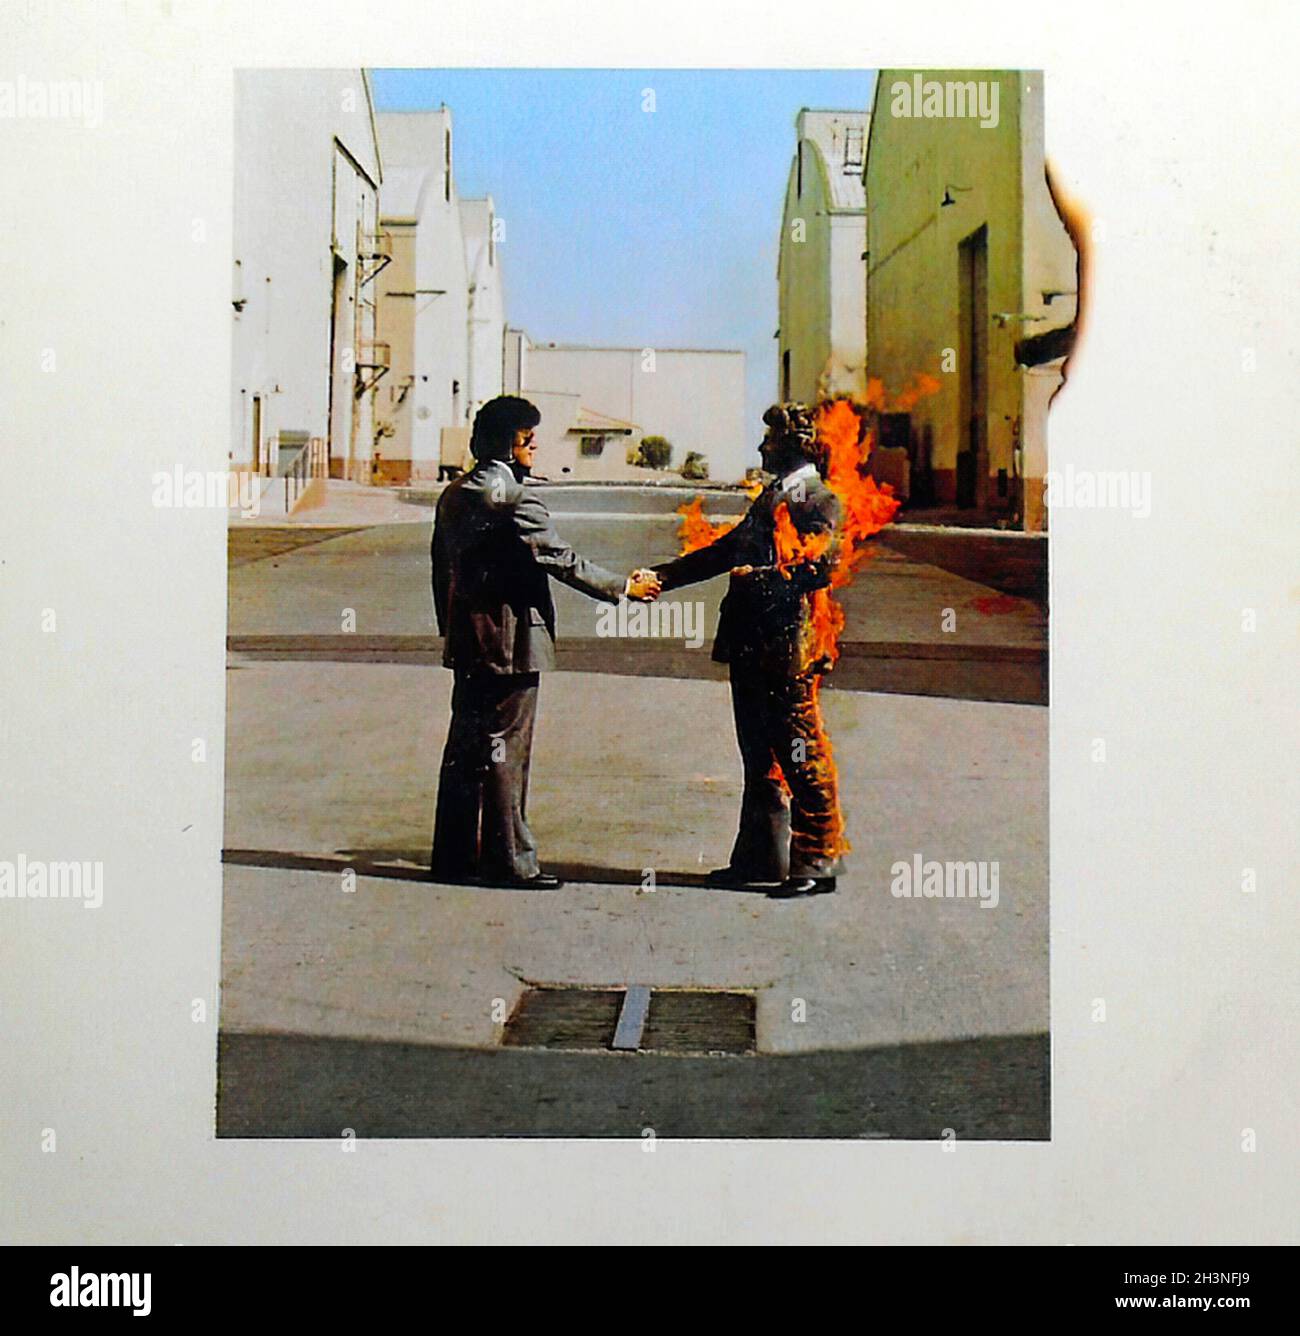 1975 Pink Floyd Wish You Were Here Lp Vinyl Record Album Cover Graphics 1970s Stock Photo